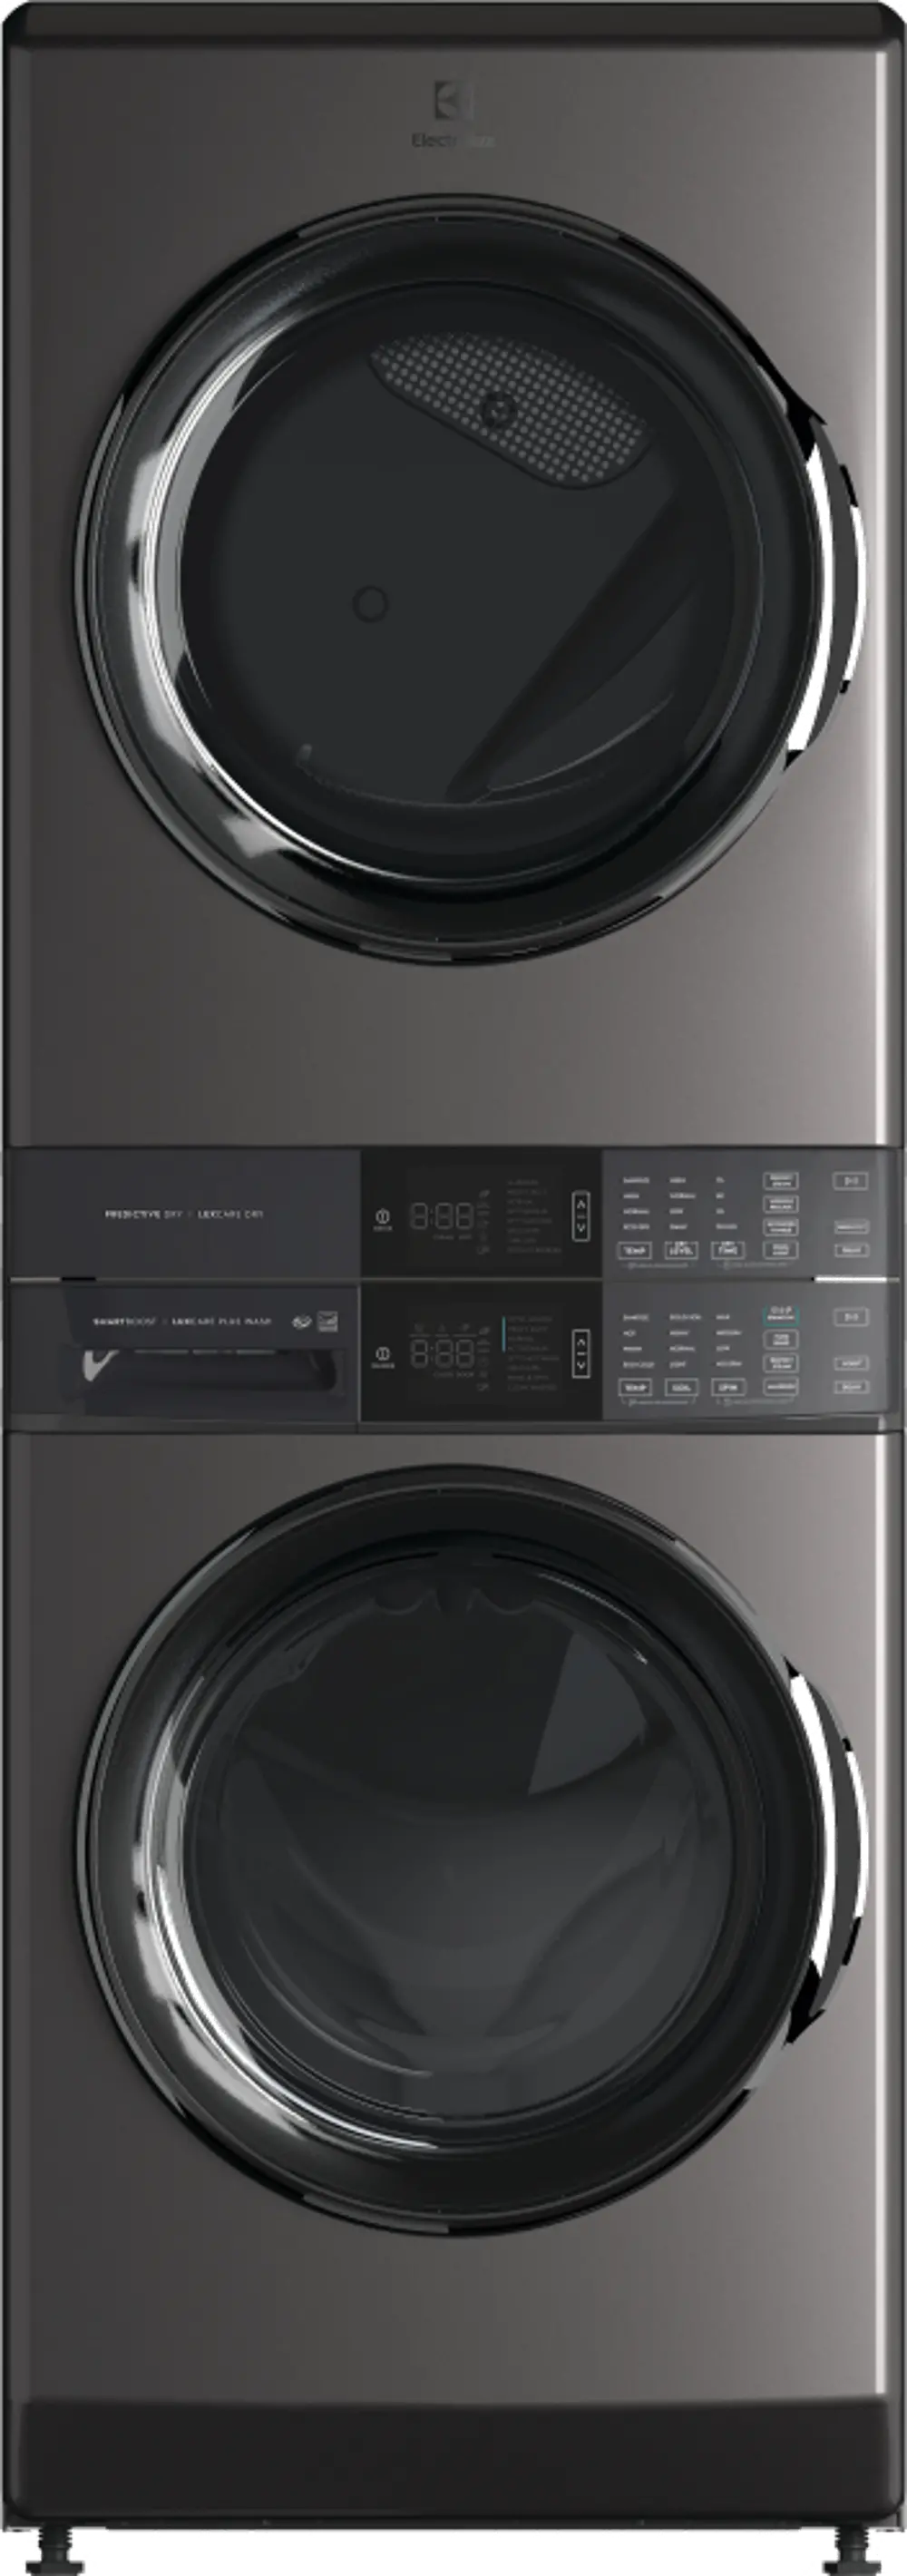 ELTG7600AT Electrolux Full Size Gas Frontload Laundry Tower - Titanium-1